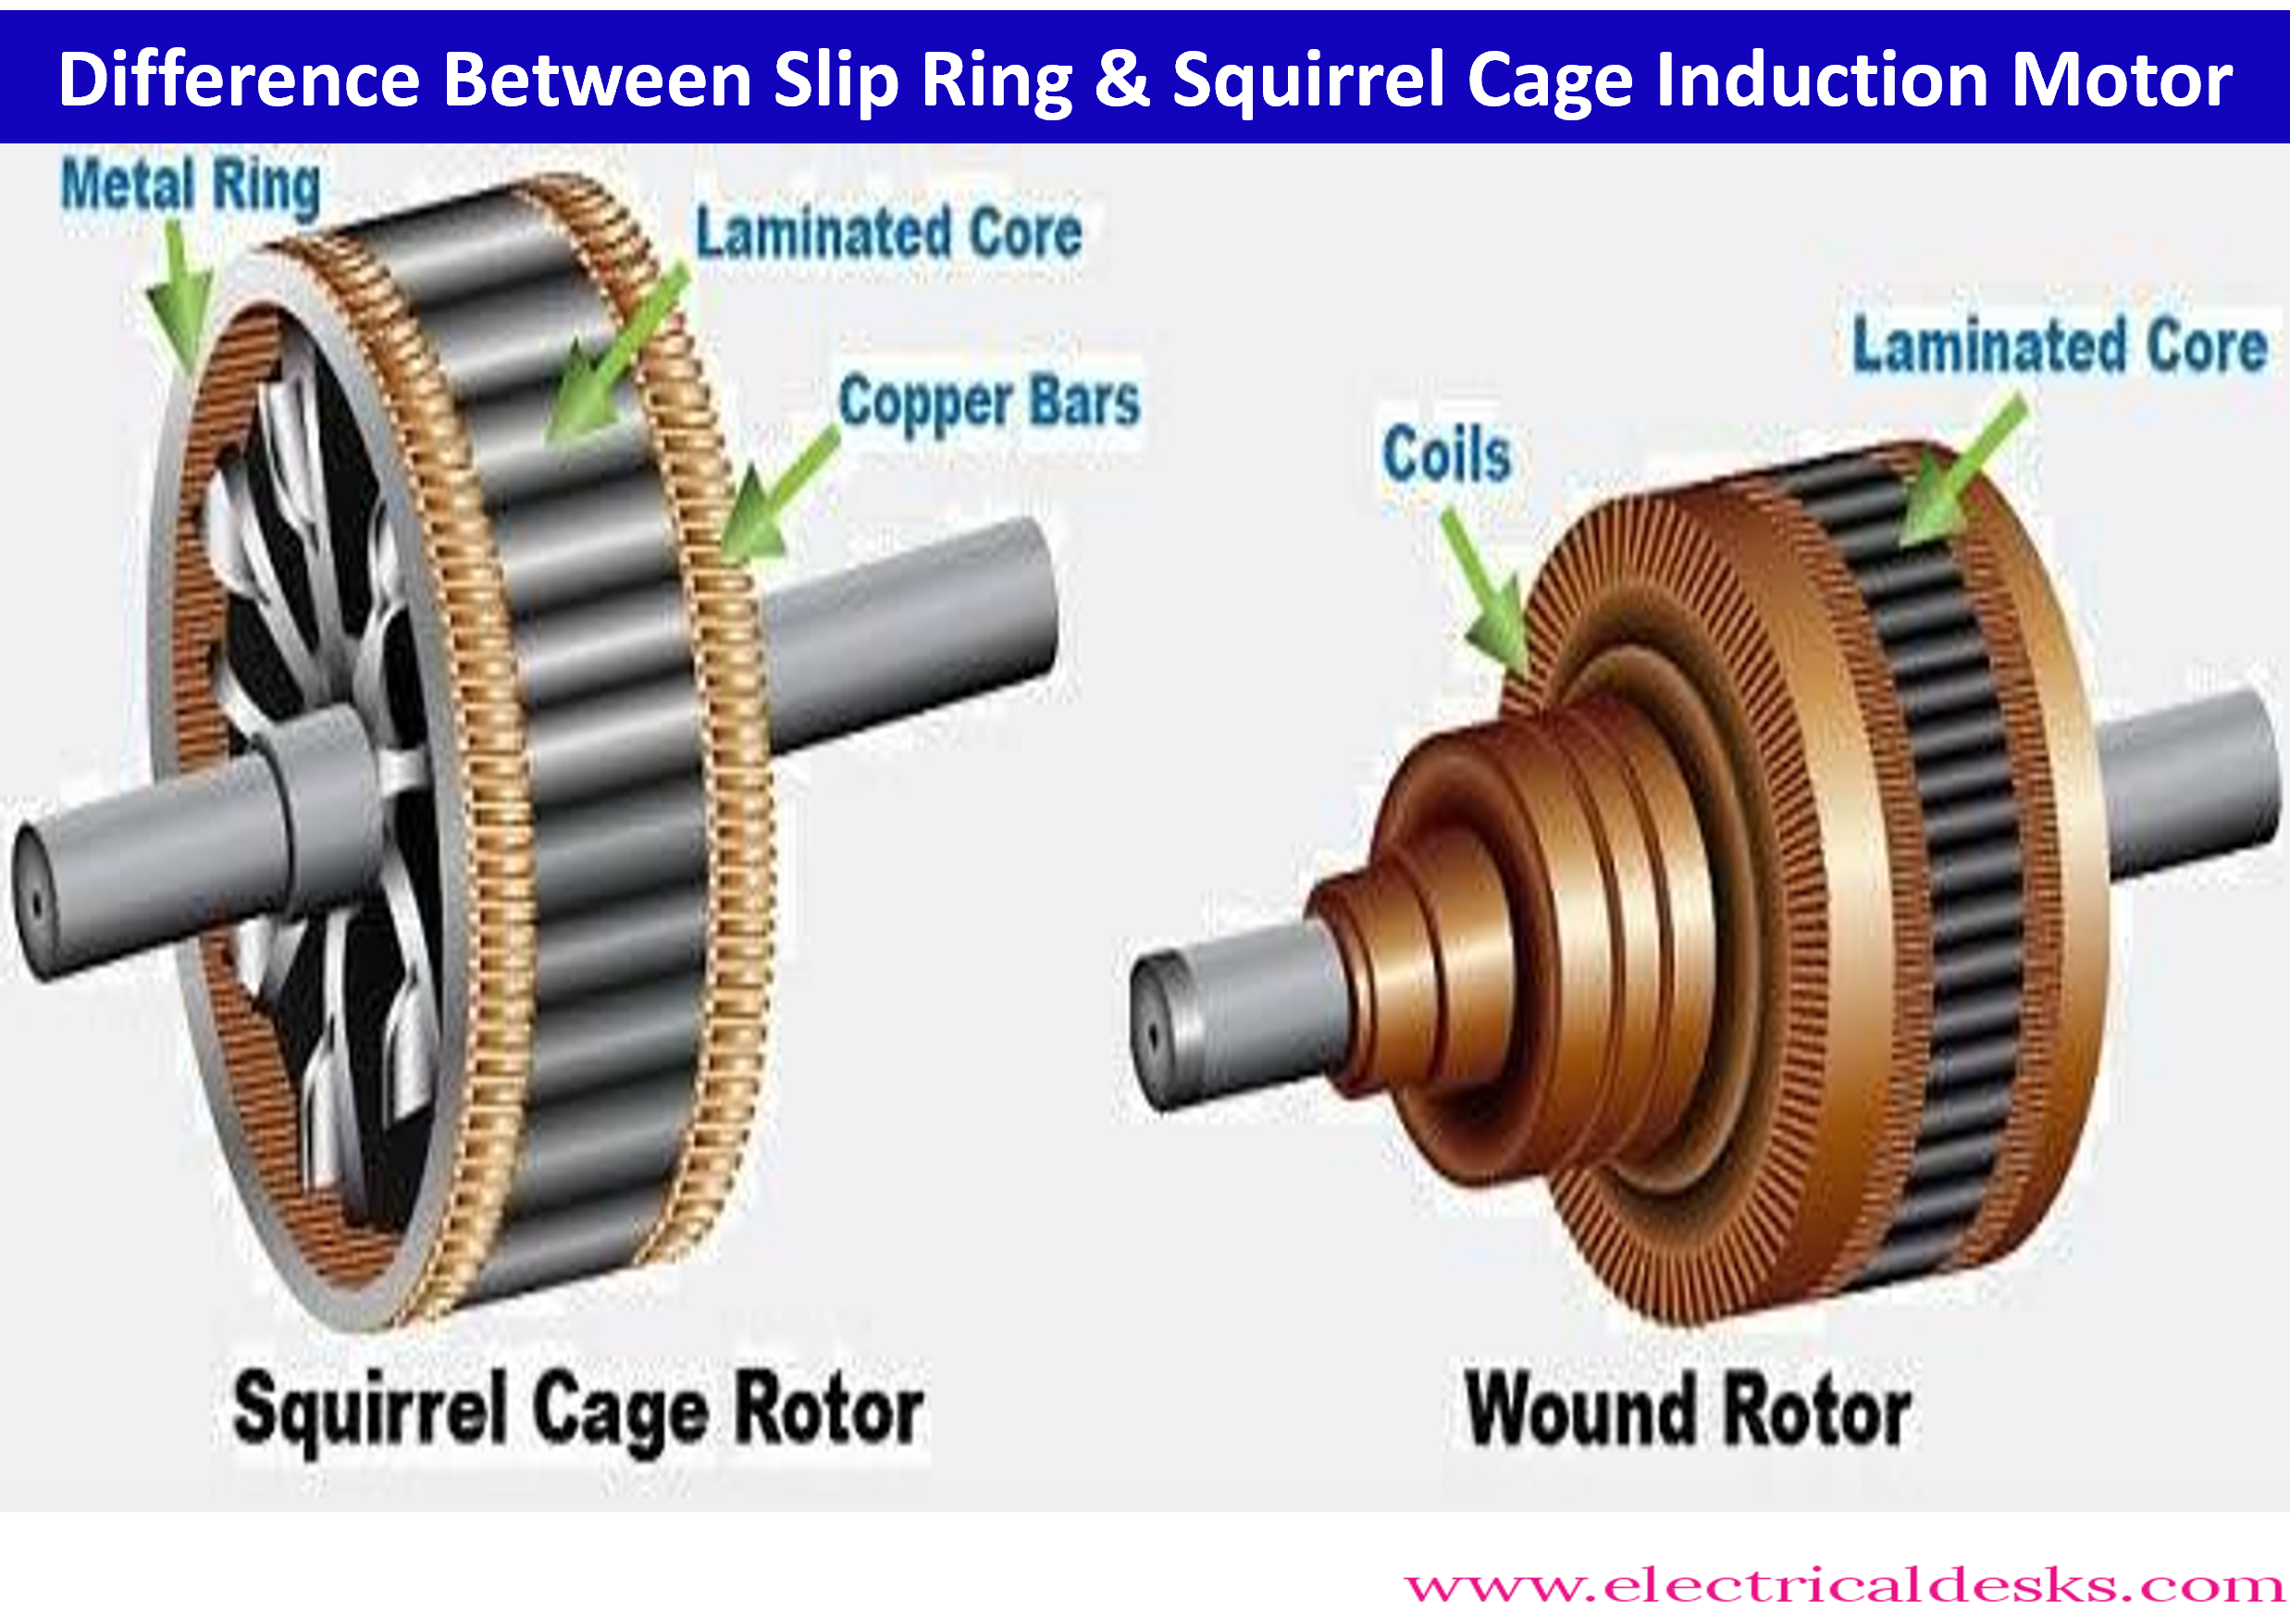 What is a Wound Rotor Motor and How Does it Work?